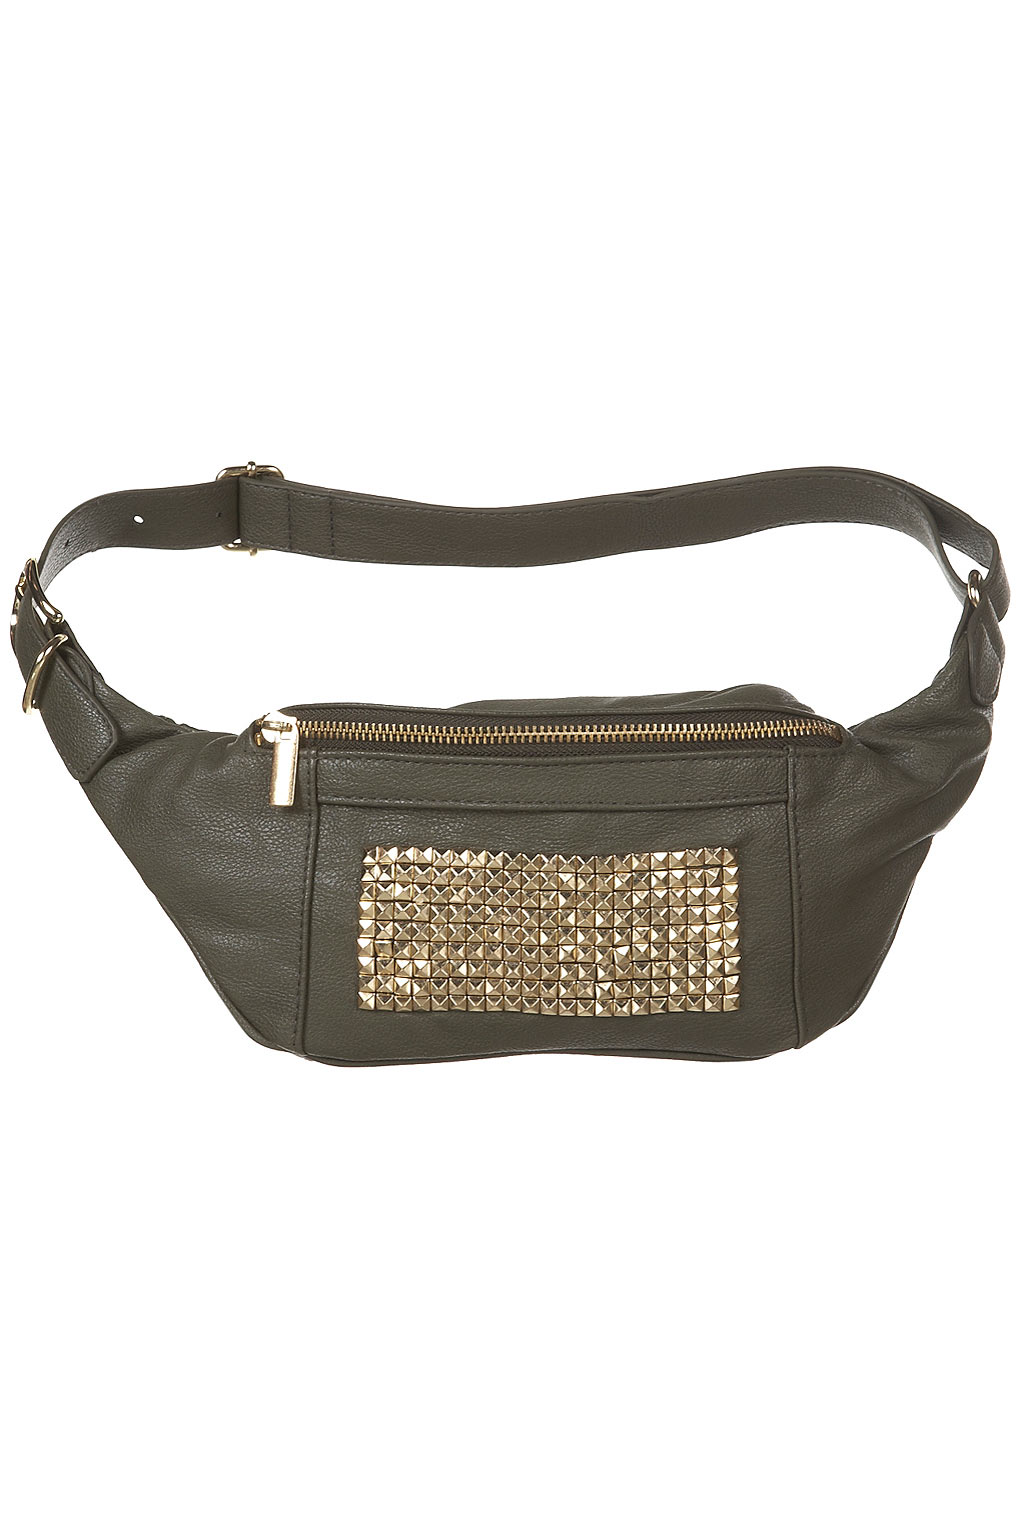 Topshop Studded Bumbag in Green | Lyst